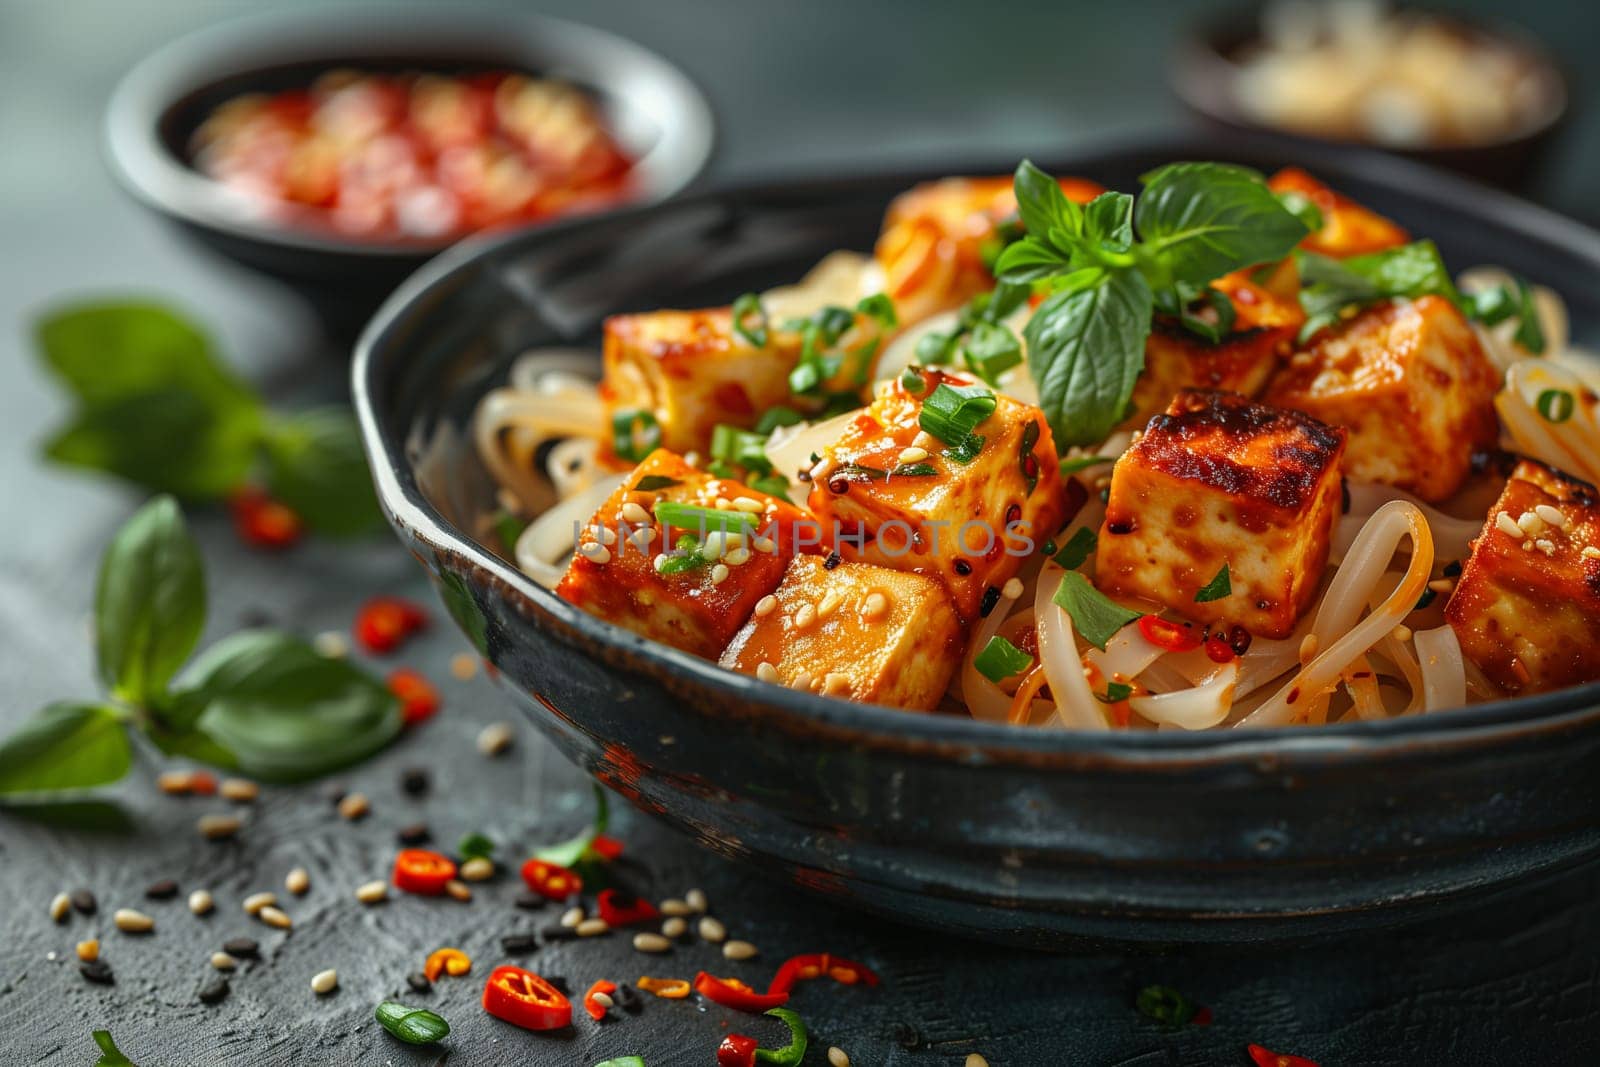 A black bowl containing Pad Thai fried rice noodles, tofu, and aromatic herbs.